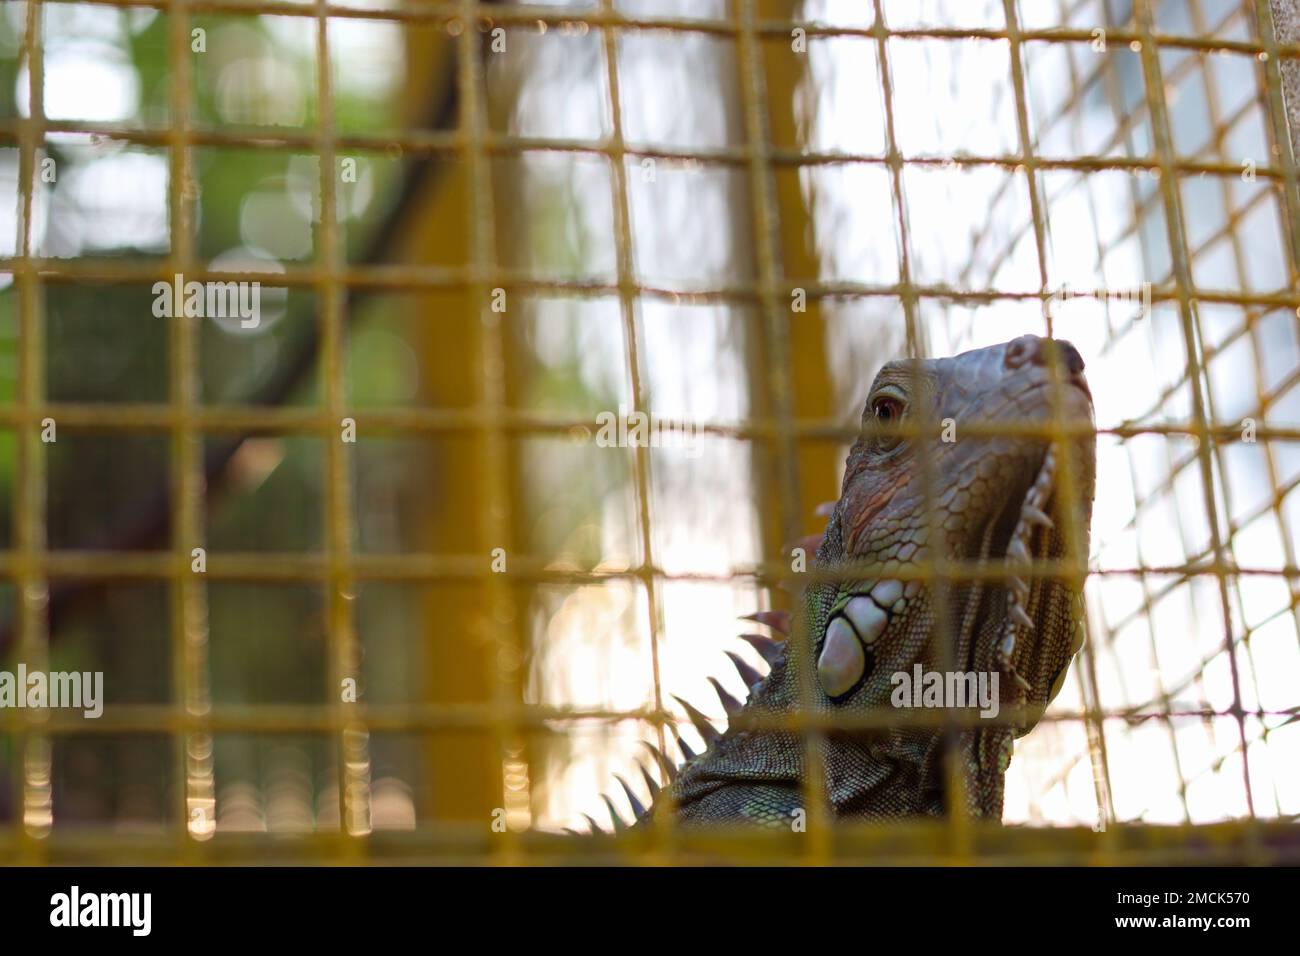 Selective focus on Green iguana eye in the cage at the park. Stock Photo